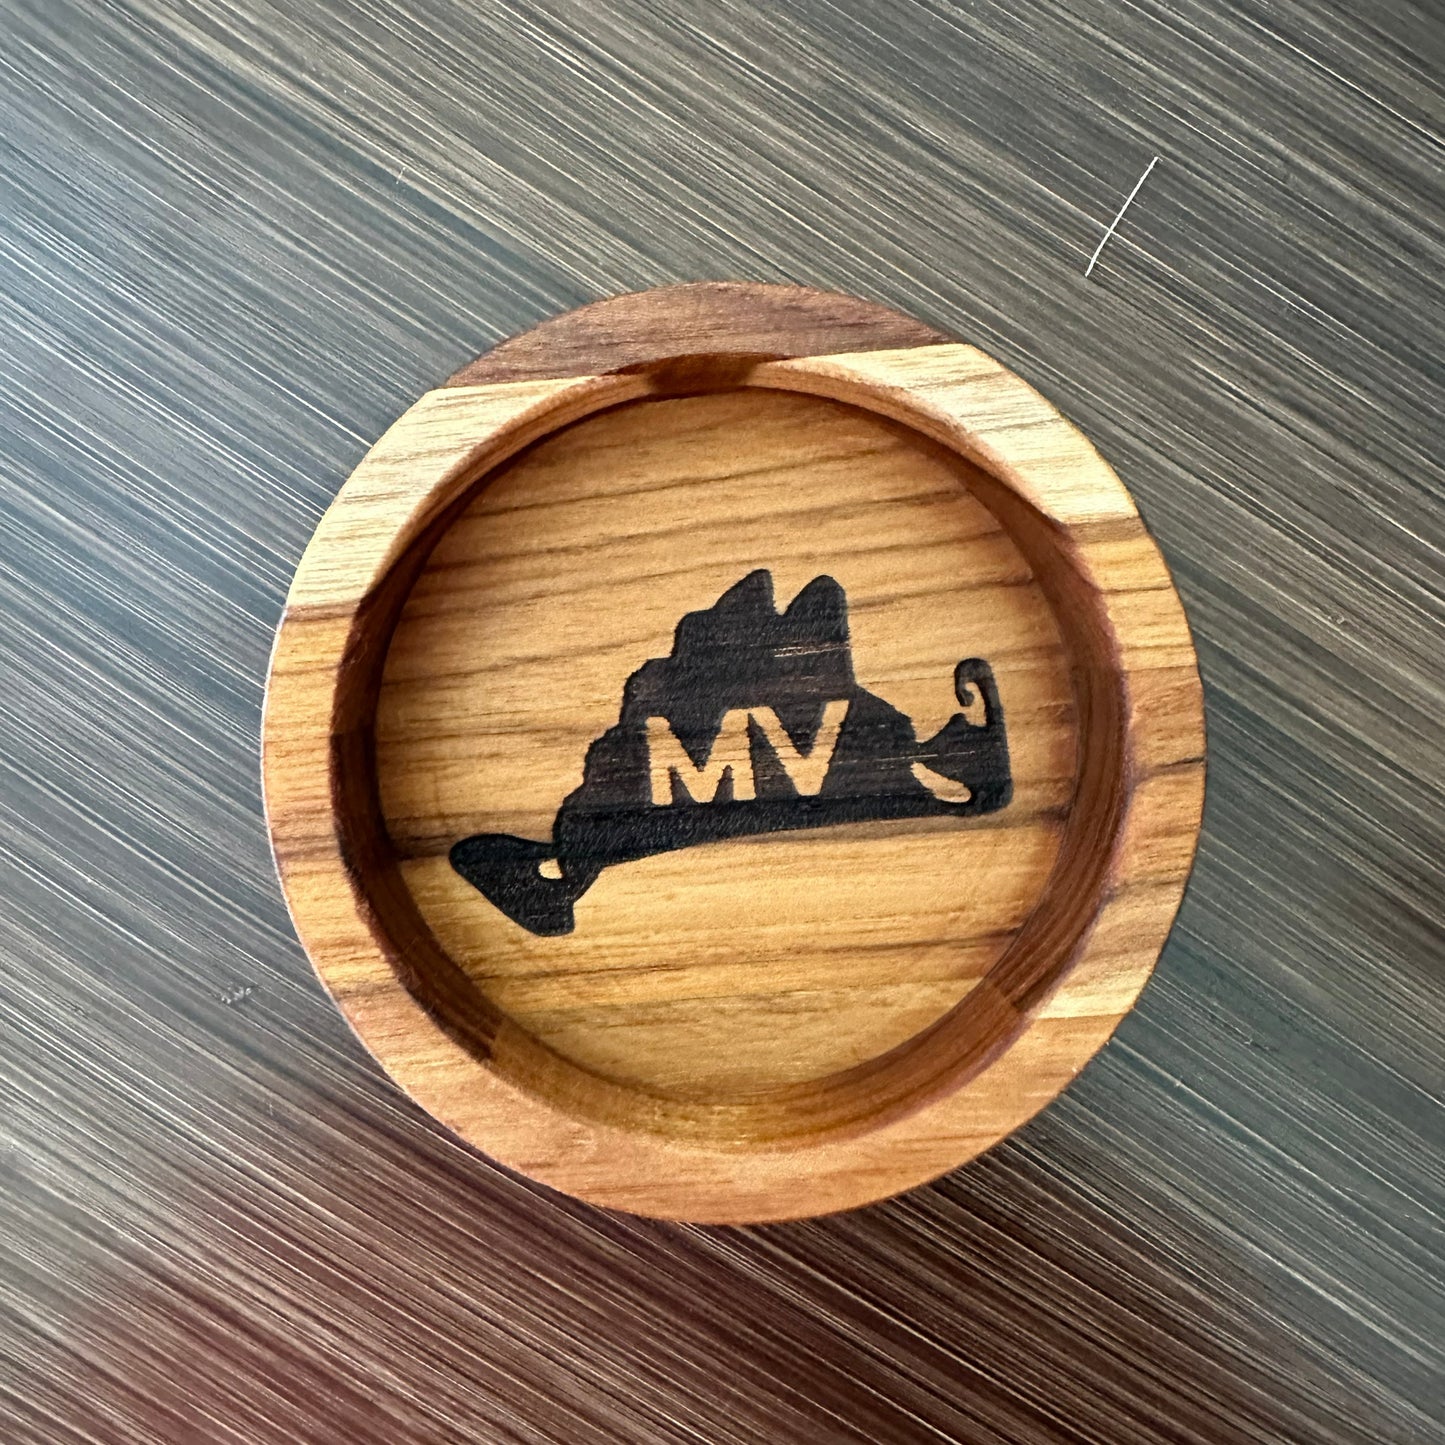 Mini wooden charcuterie bowl with engraved Martha's Vineyard design